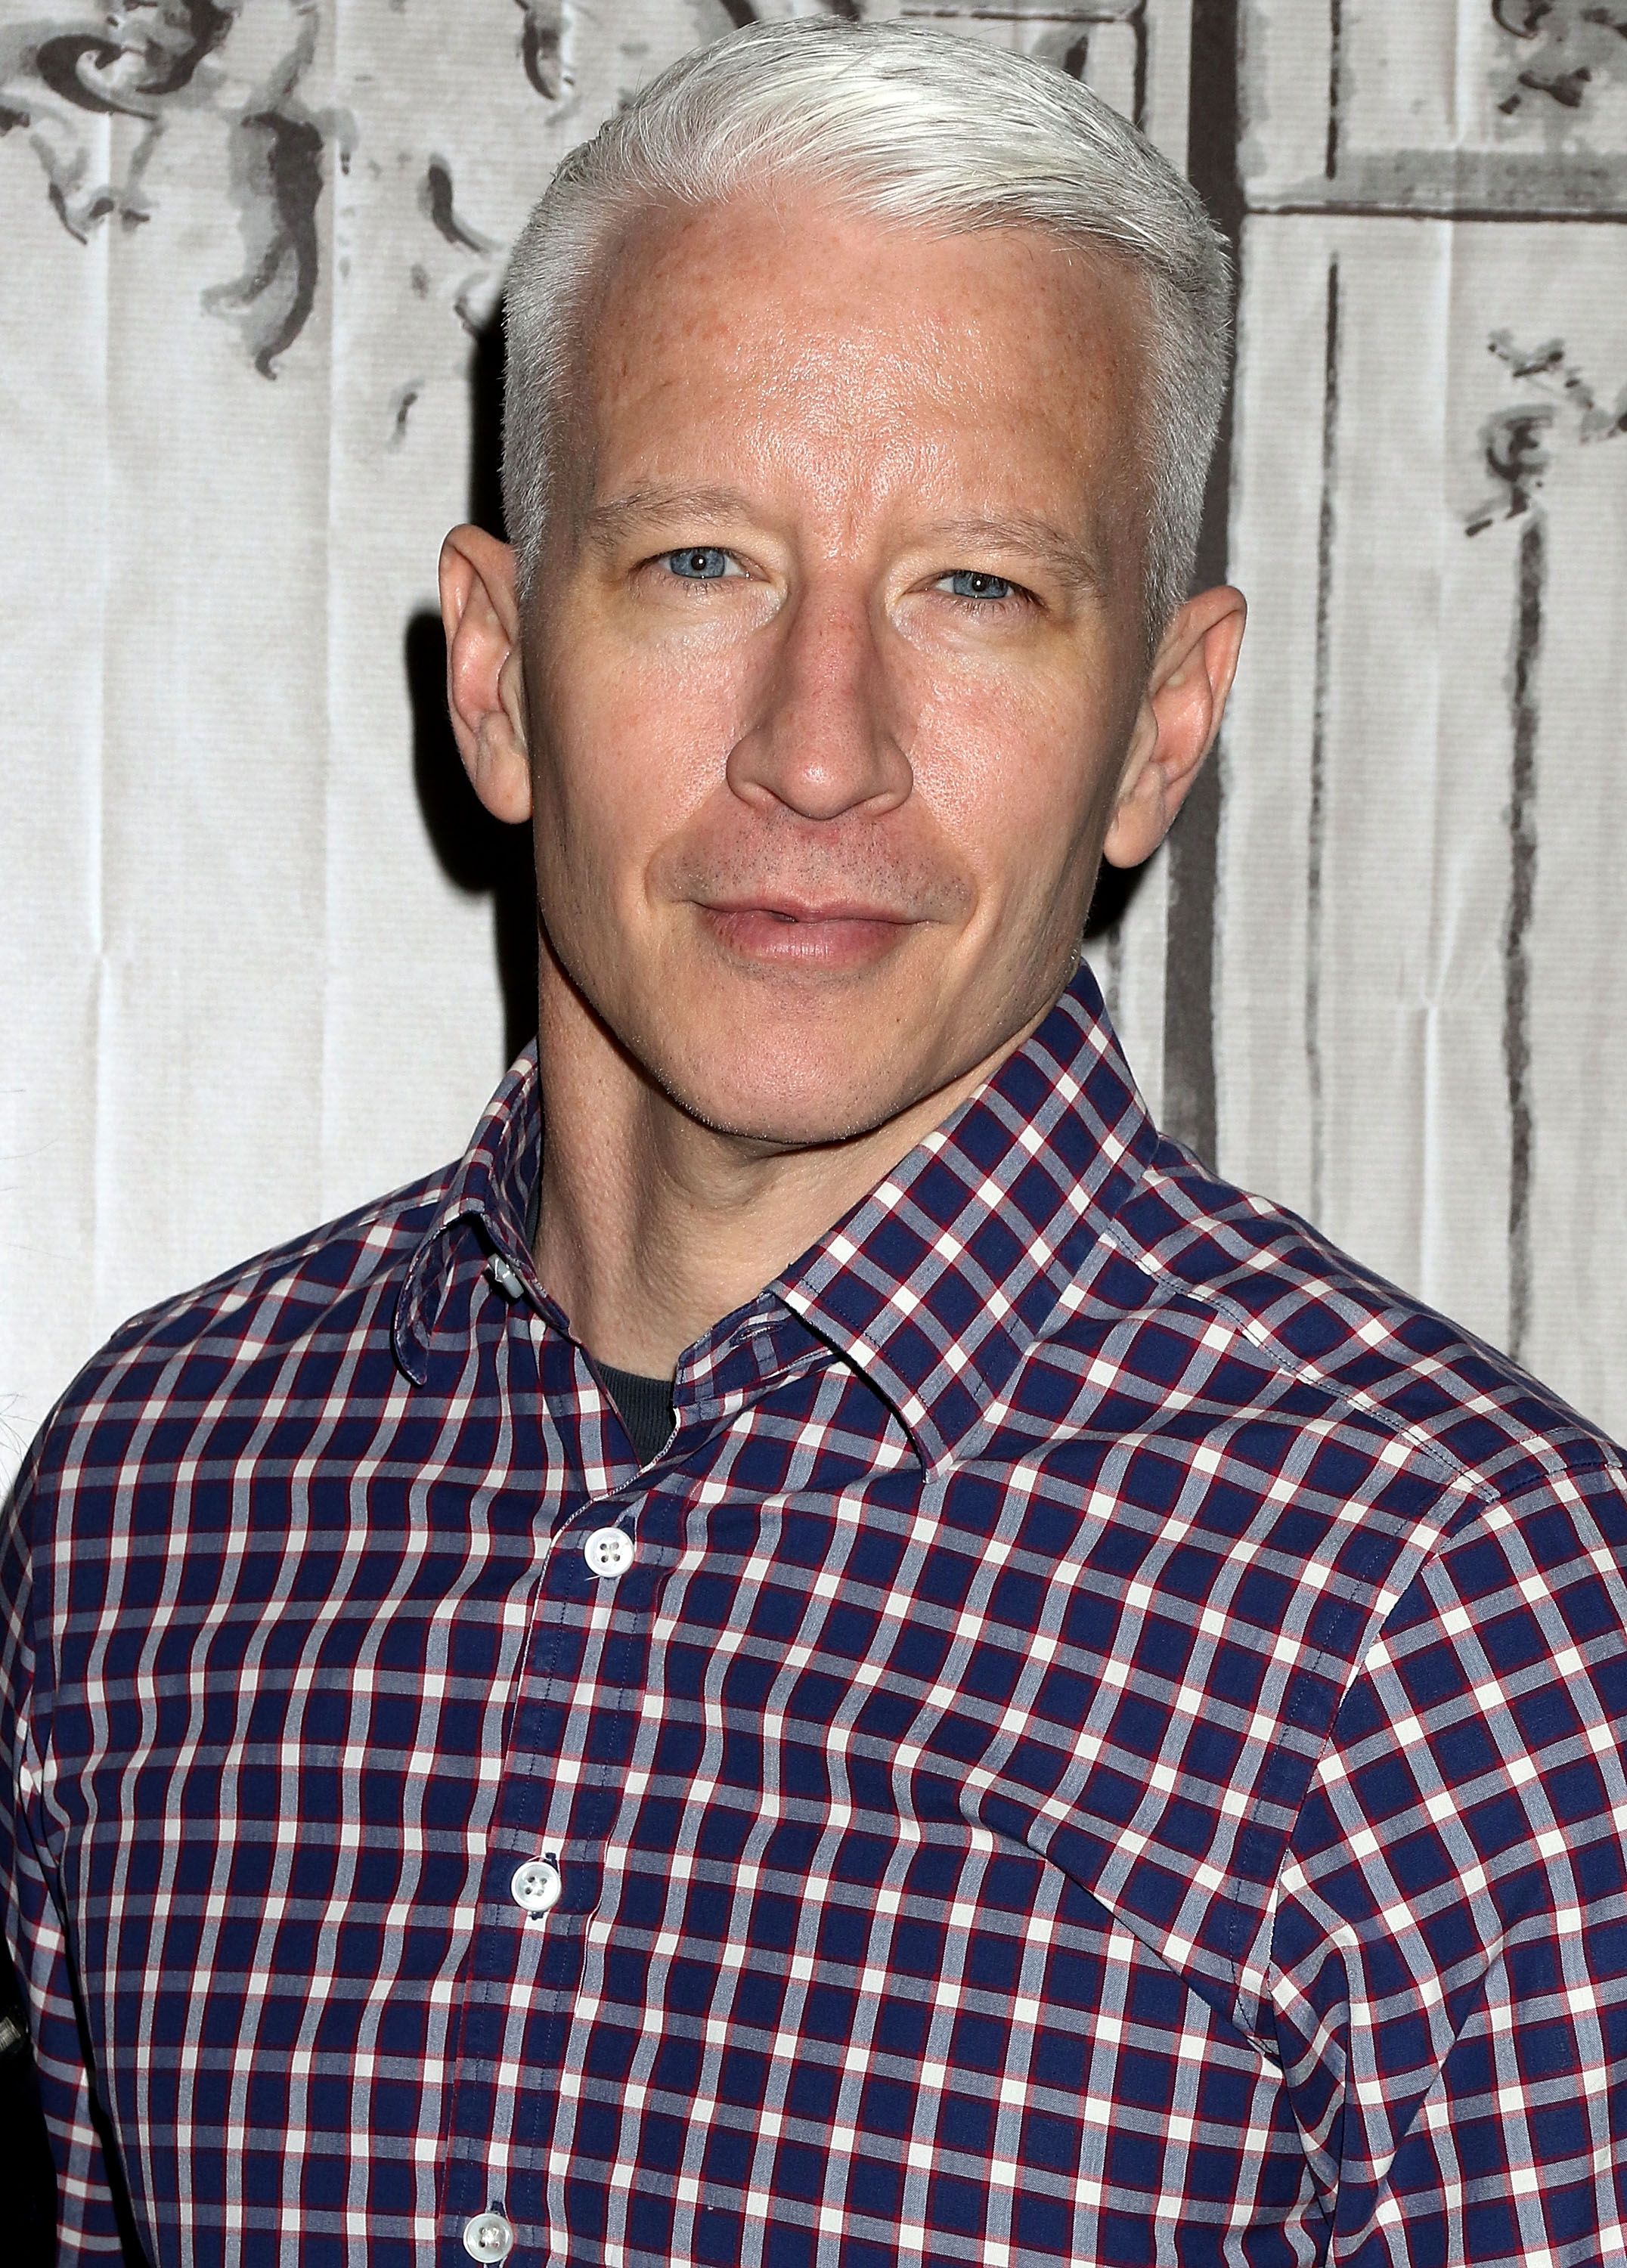 Anderson Cooper at the AOL Build Speaker Series to discuss "Nothing Left Unsaid" in New York on April 15, 2016. | Source: Getty Images